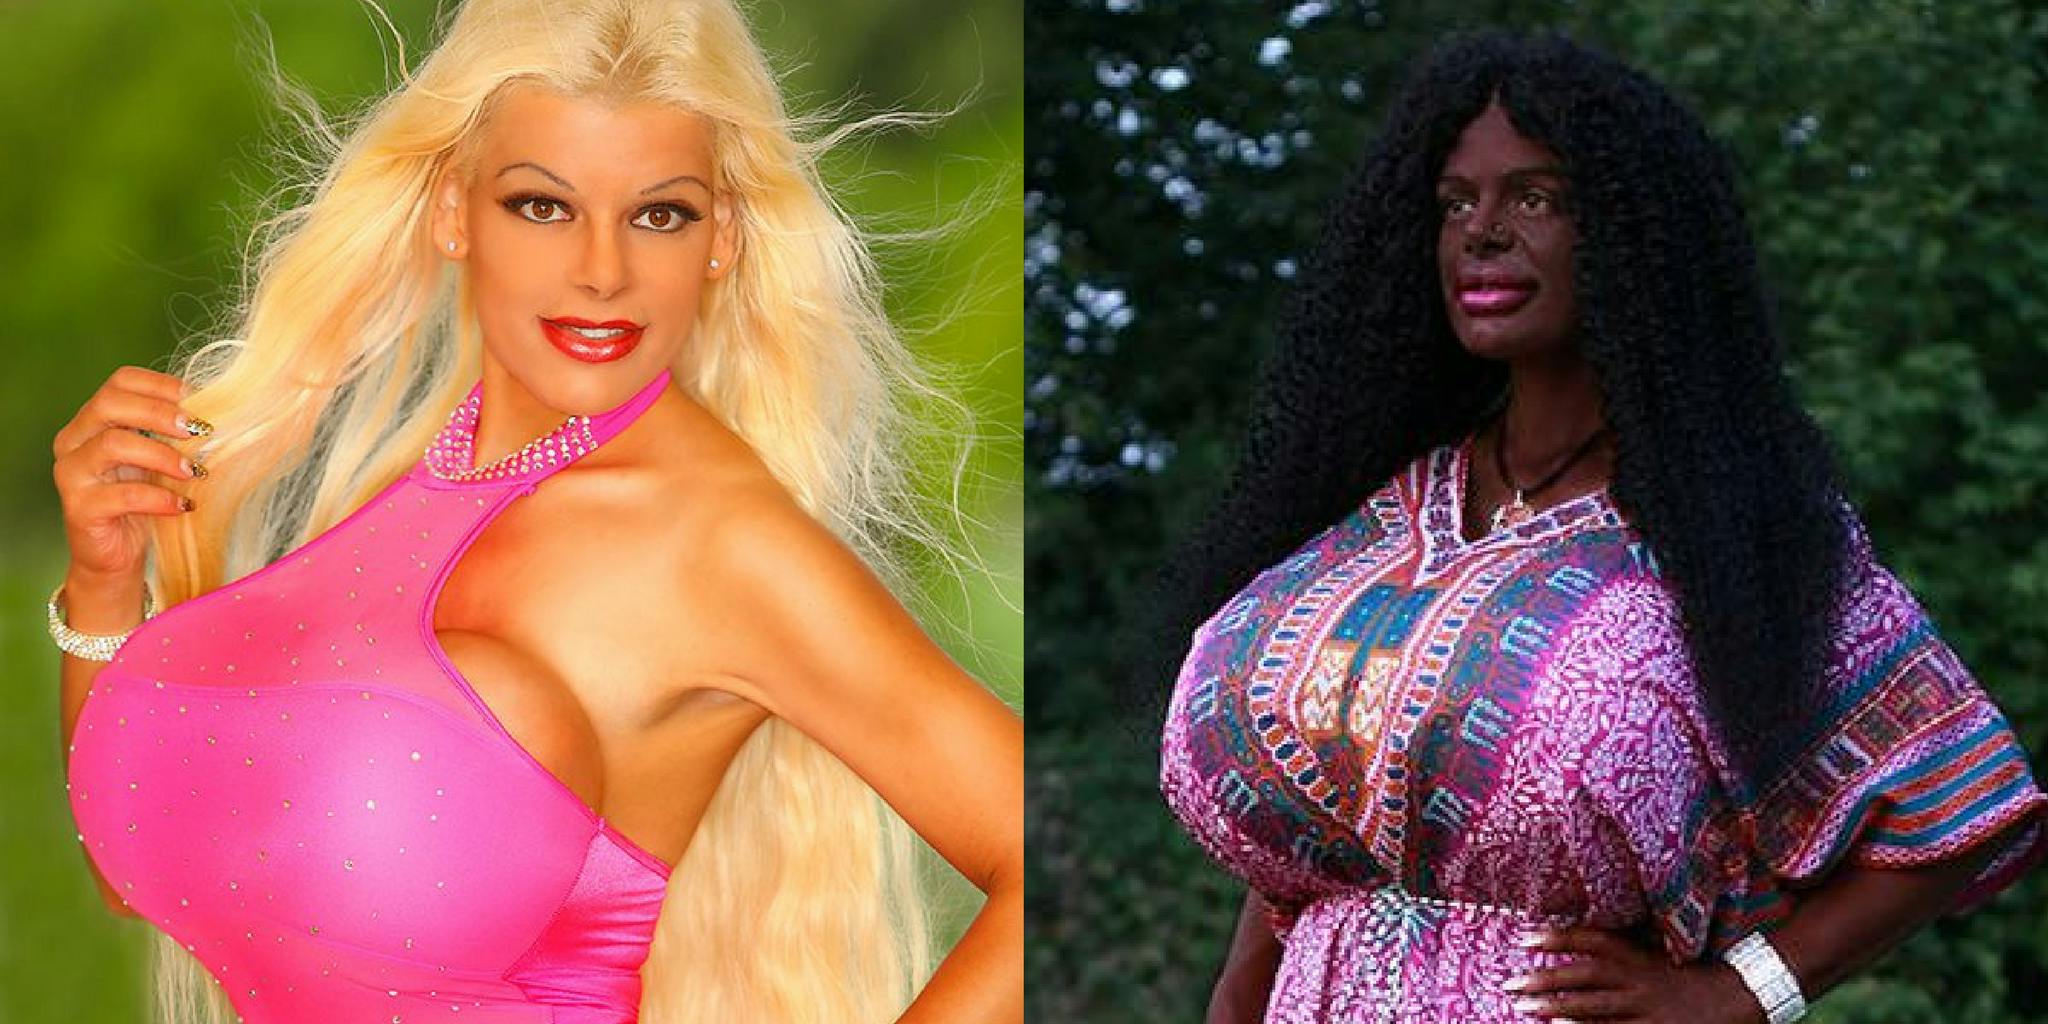 White model with biggest boobs in Europe 'turns black' after tanning  injections and claims to be African